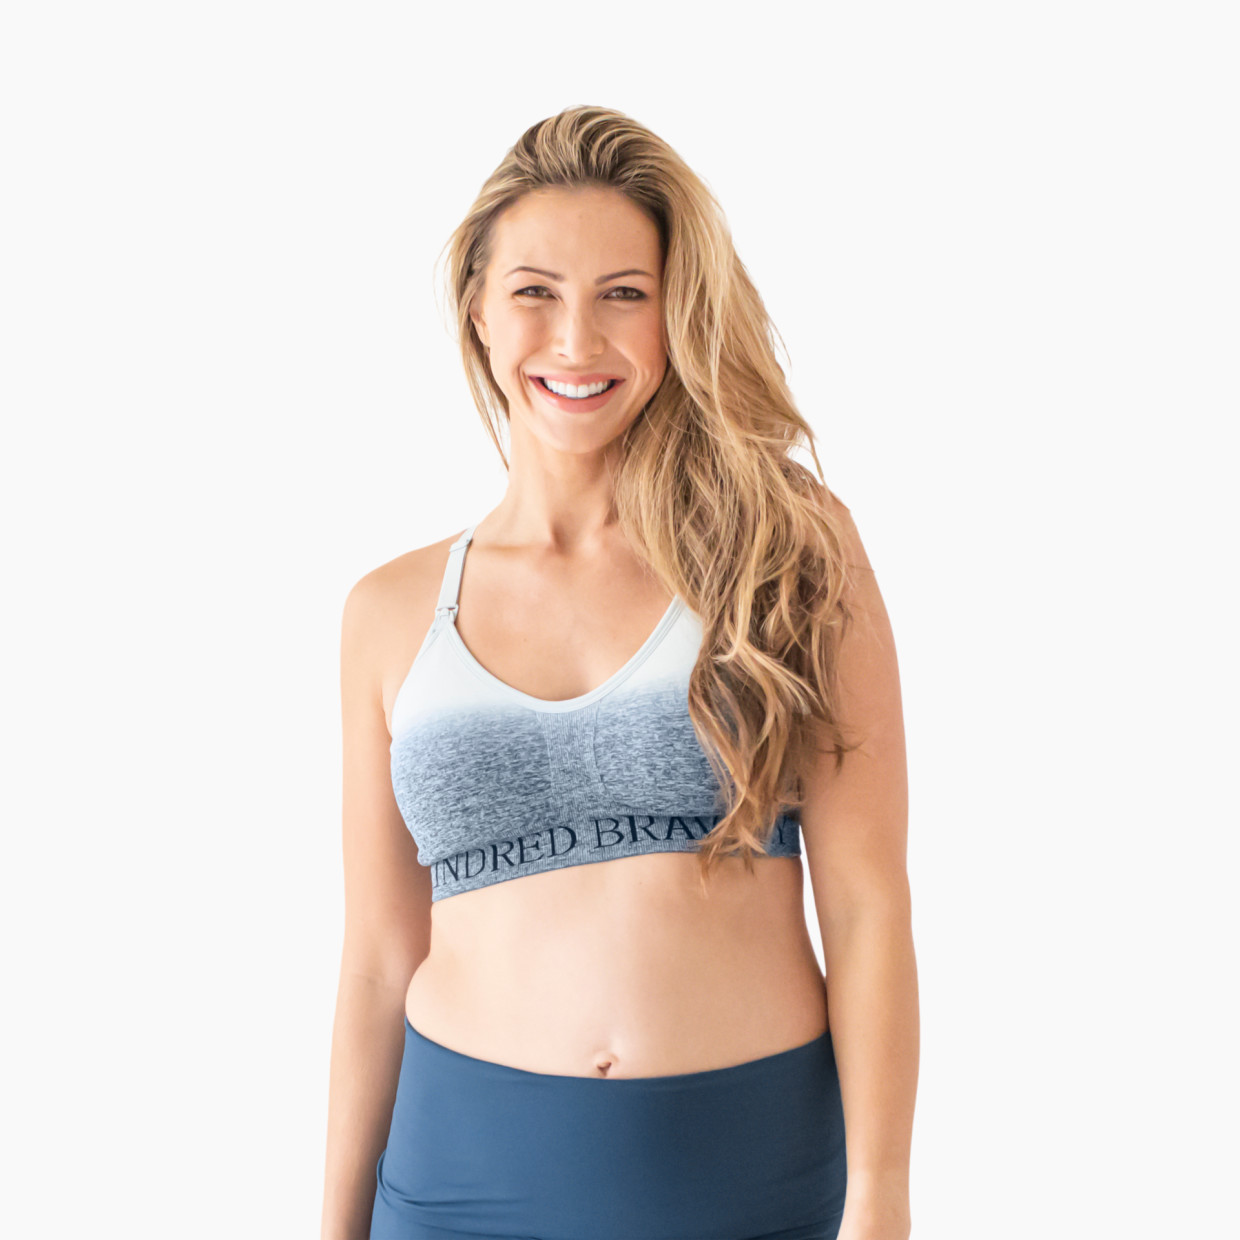 Kindred Bravely Sublime Support Low Impact Nursing & Maternity Sports Bra - Ombre Storm, Large.